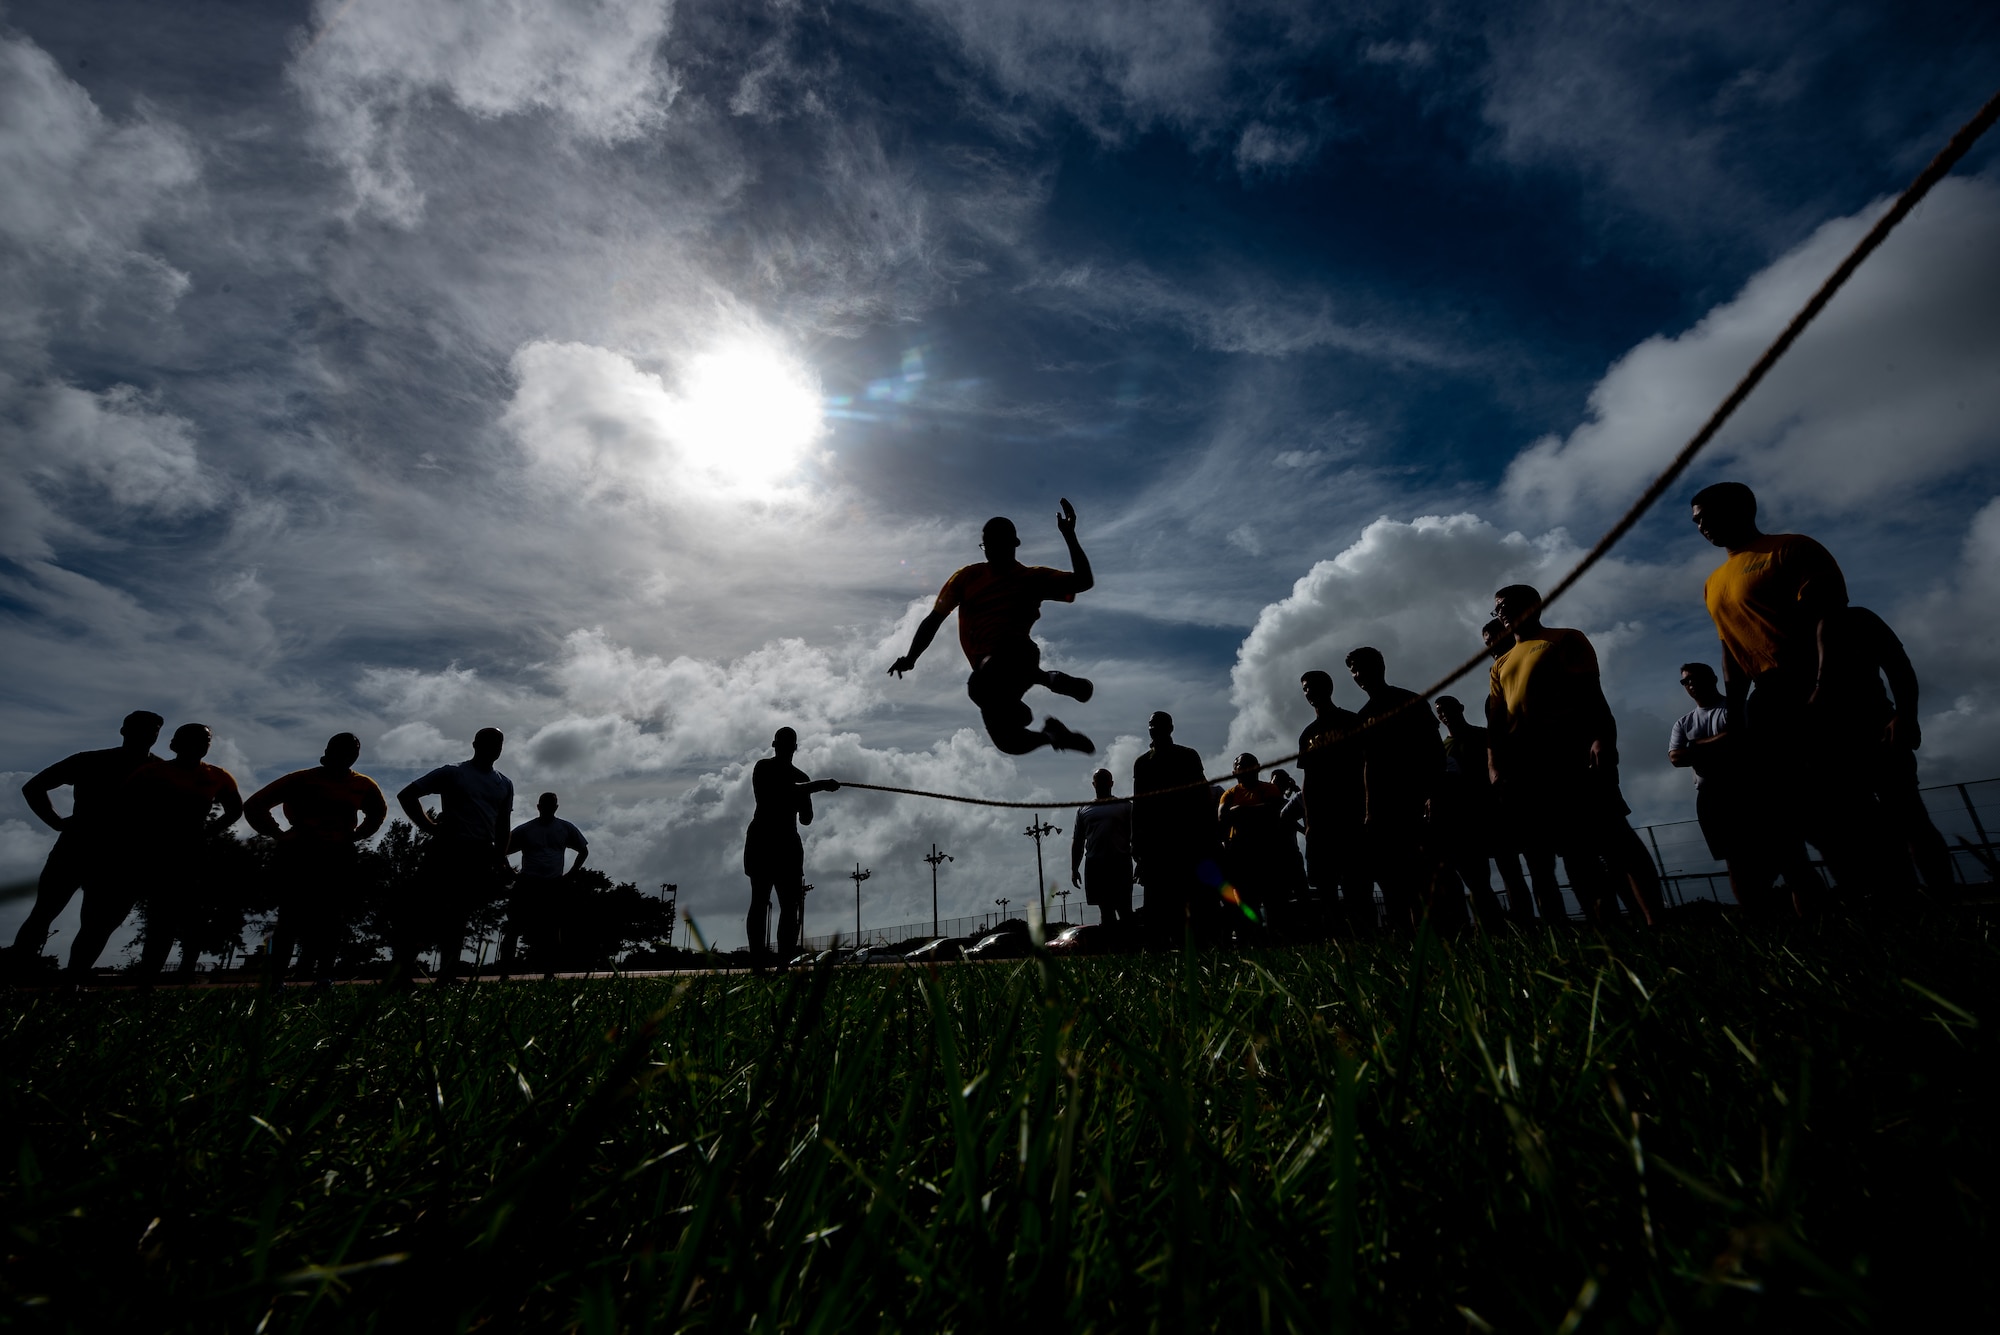 U.S. Soldiers, Sailors, Marines and Airmen take turns jumping over a rope during the Okinawa Joint Fitness Challenge Sept. 26, 2018, at Kadena Air Base, Japan. The jump rope challenge required all 48 students to jump over the rope while it was in motion. If the rope touched a student while they were jumping over, or if the rope stopped, the students would have to start over again. (U.S. Air Force photo by Staff Sgt. Micaiah Anthony)